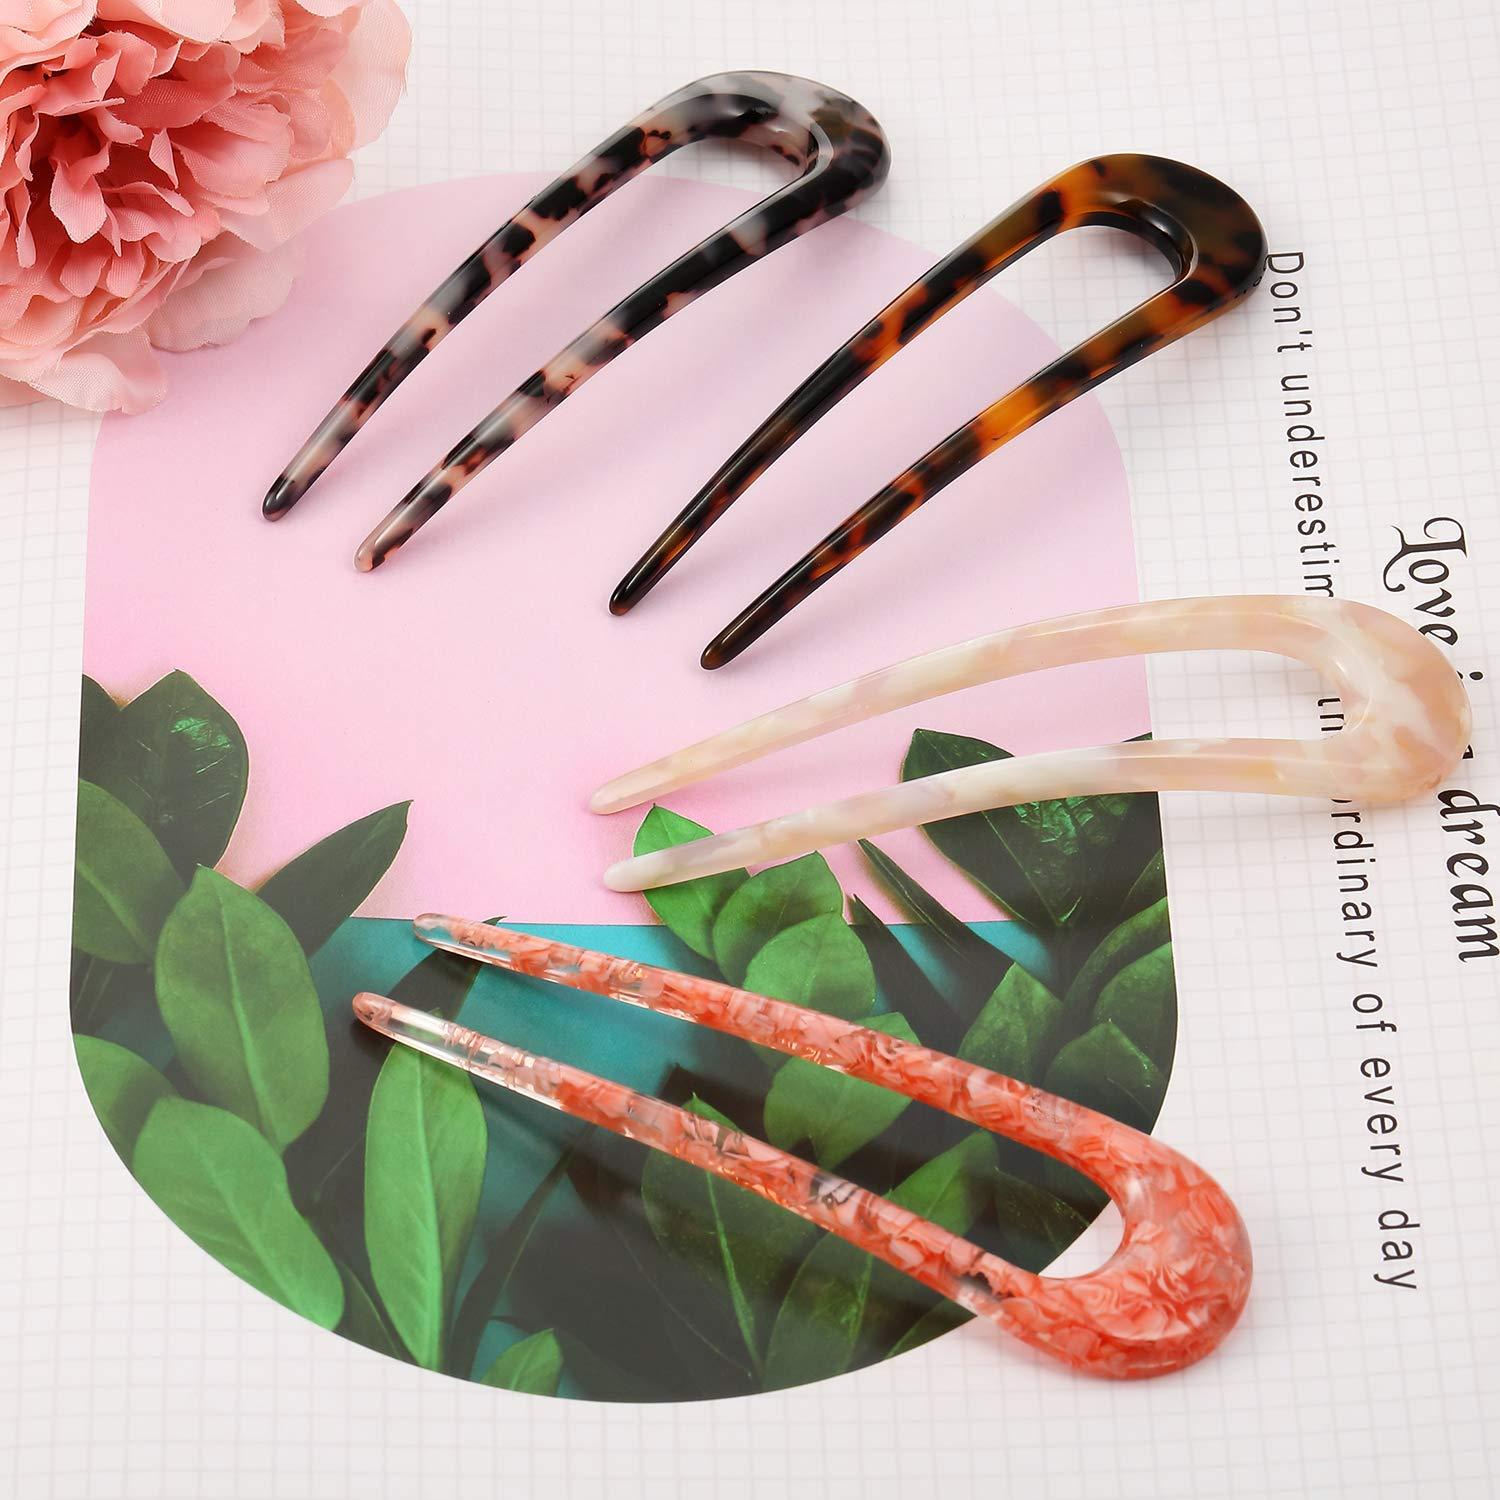 Lmyzcbzl U Shaped Hair Pin French Hair Pins U Shaped Hairpins U Shaped Hair  Pin Fork French hair fork for Women Girls Hairstyle Accessories 10.3 * 2.6cm